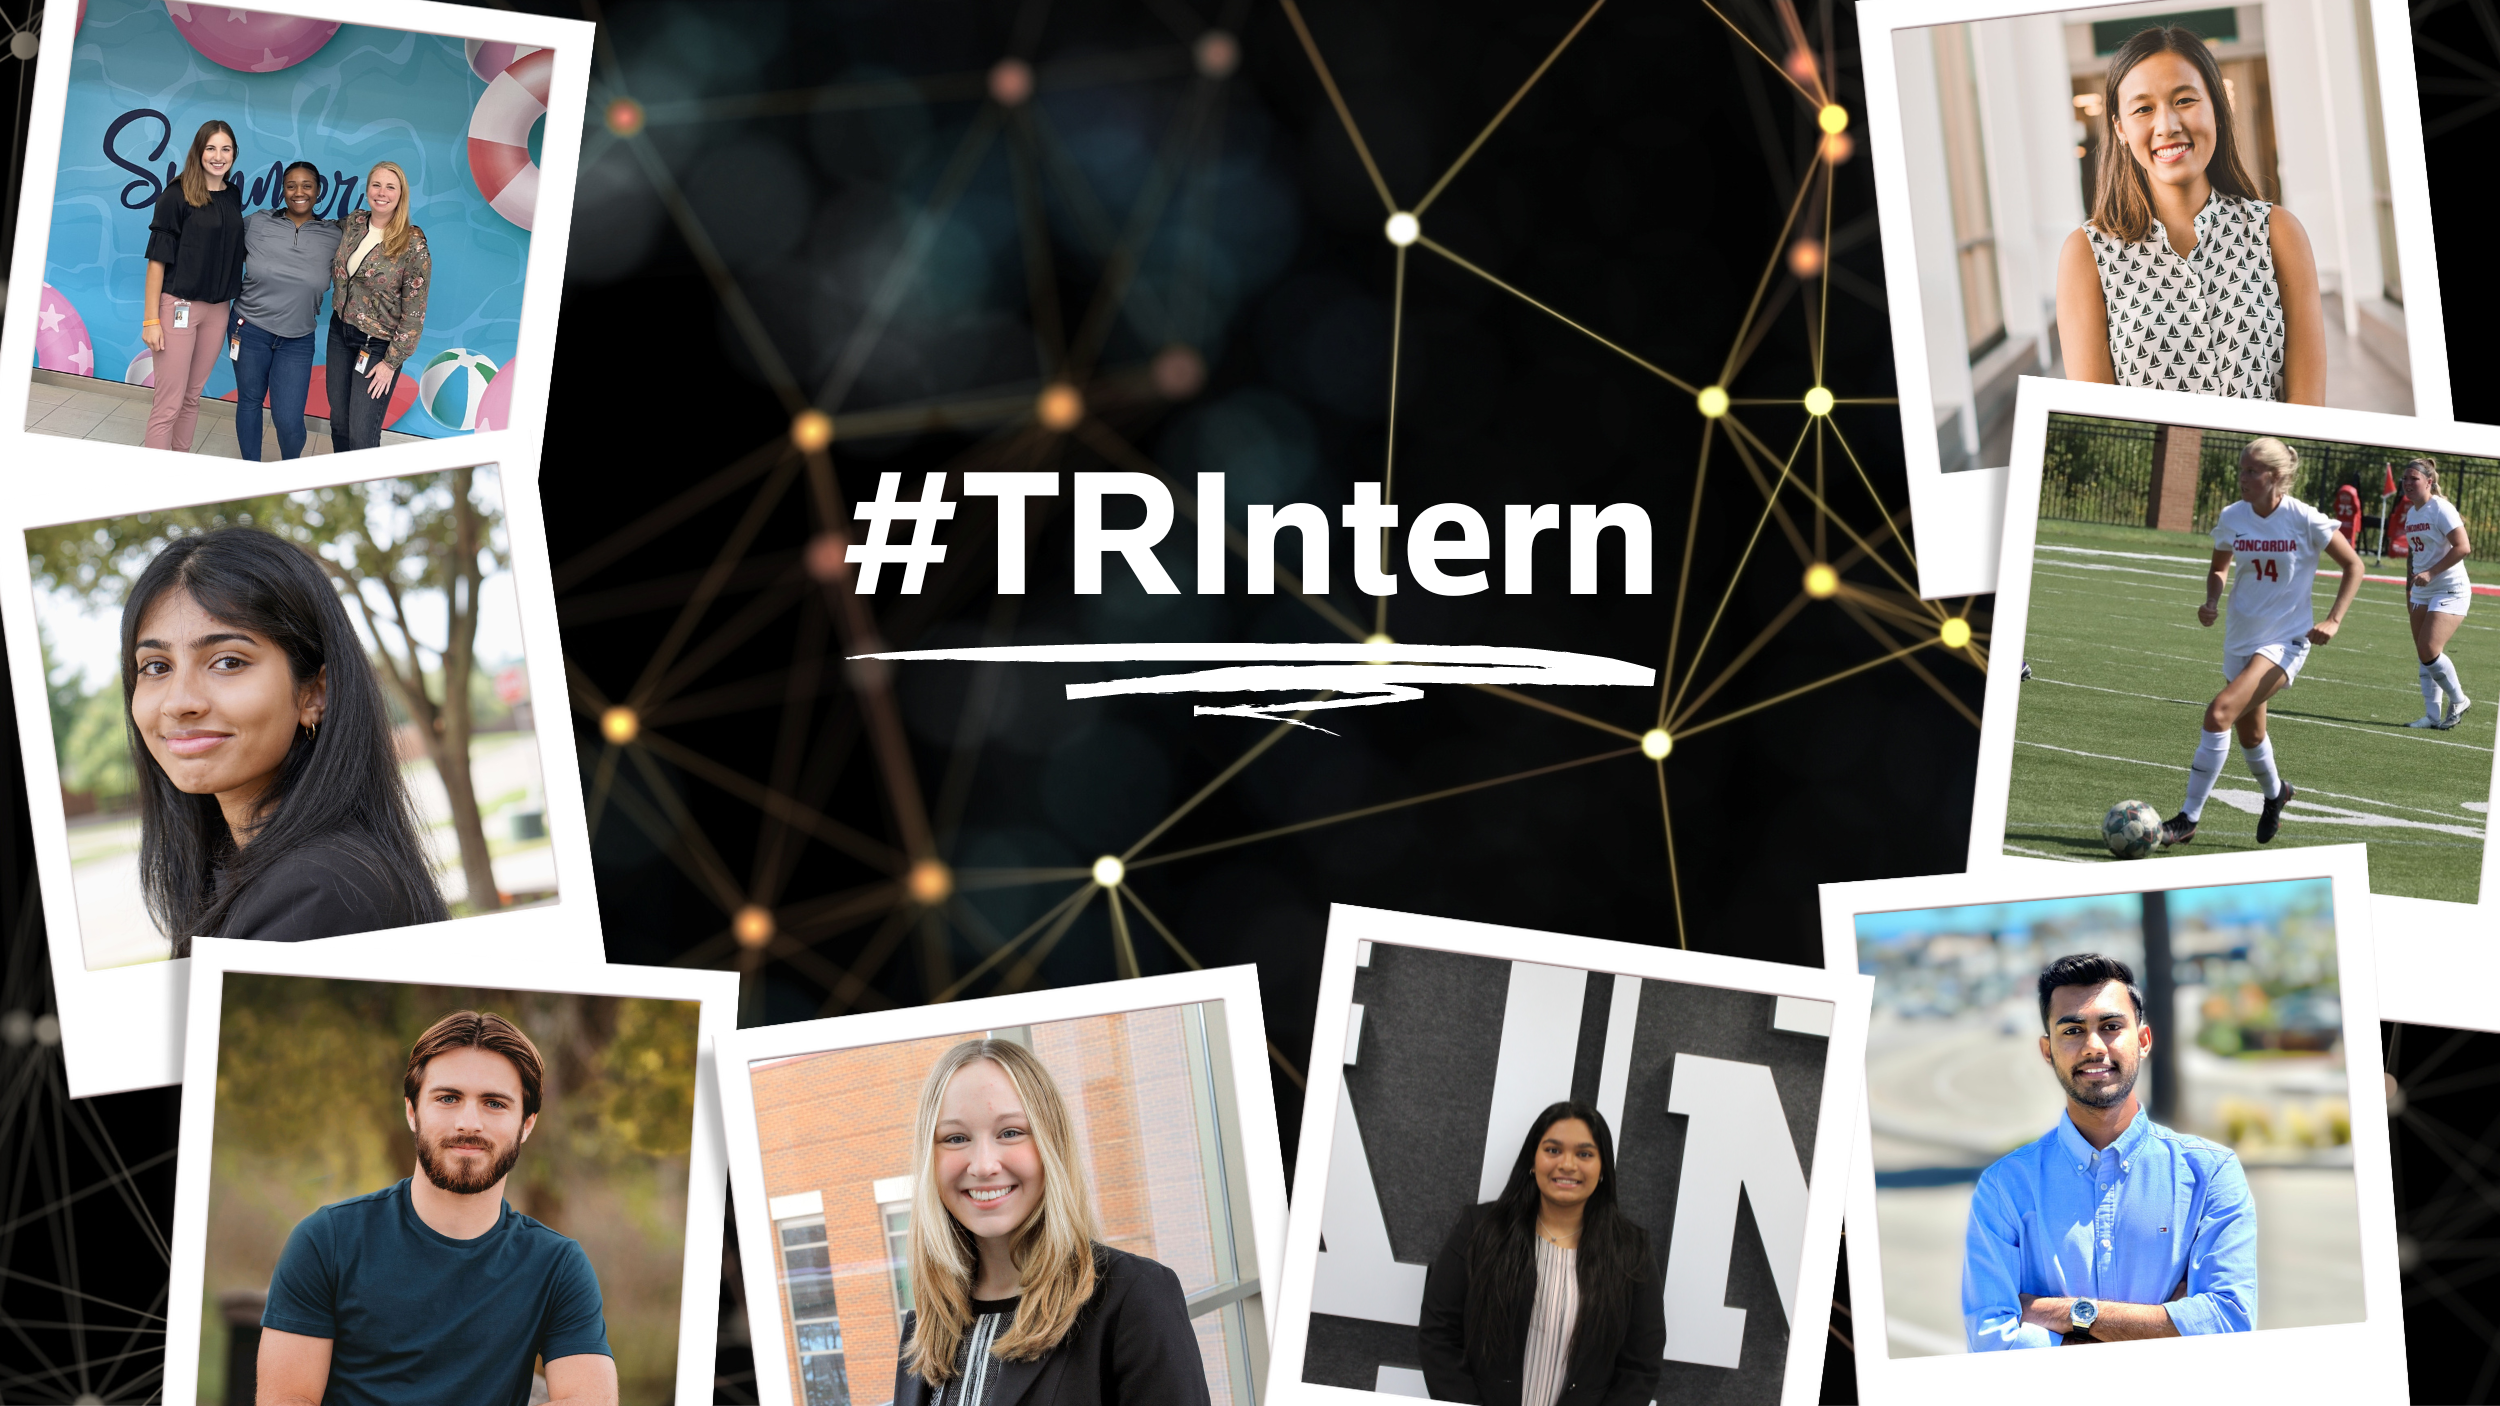 The hashtag 'TRIntern' with several photos of interns (ALT descriptions available within blog'